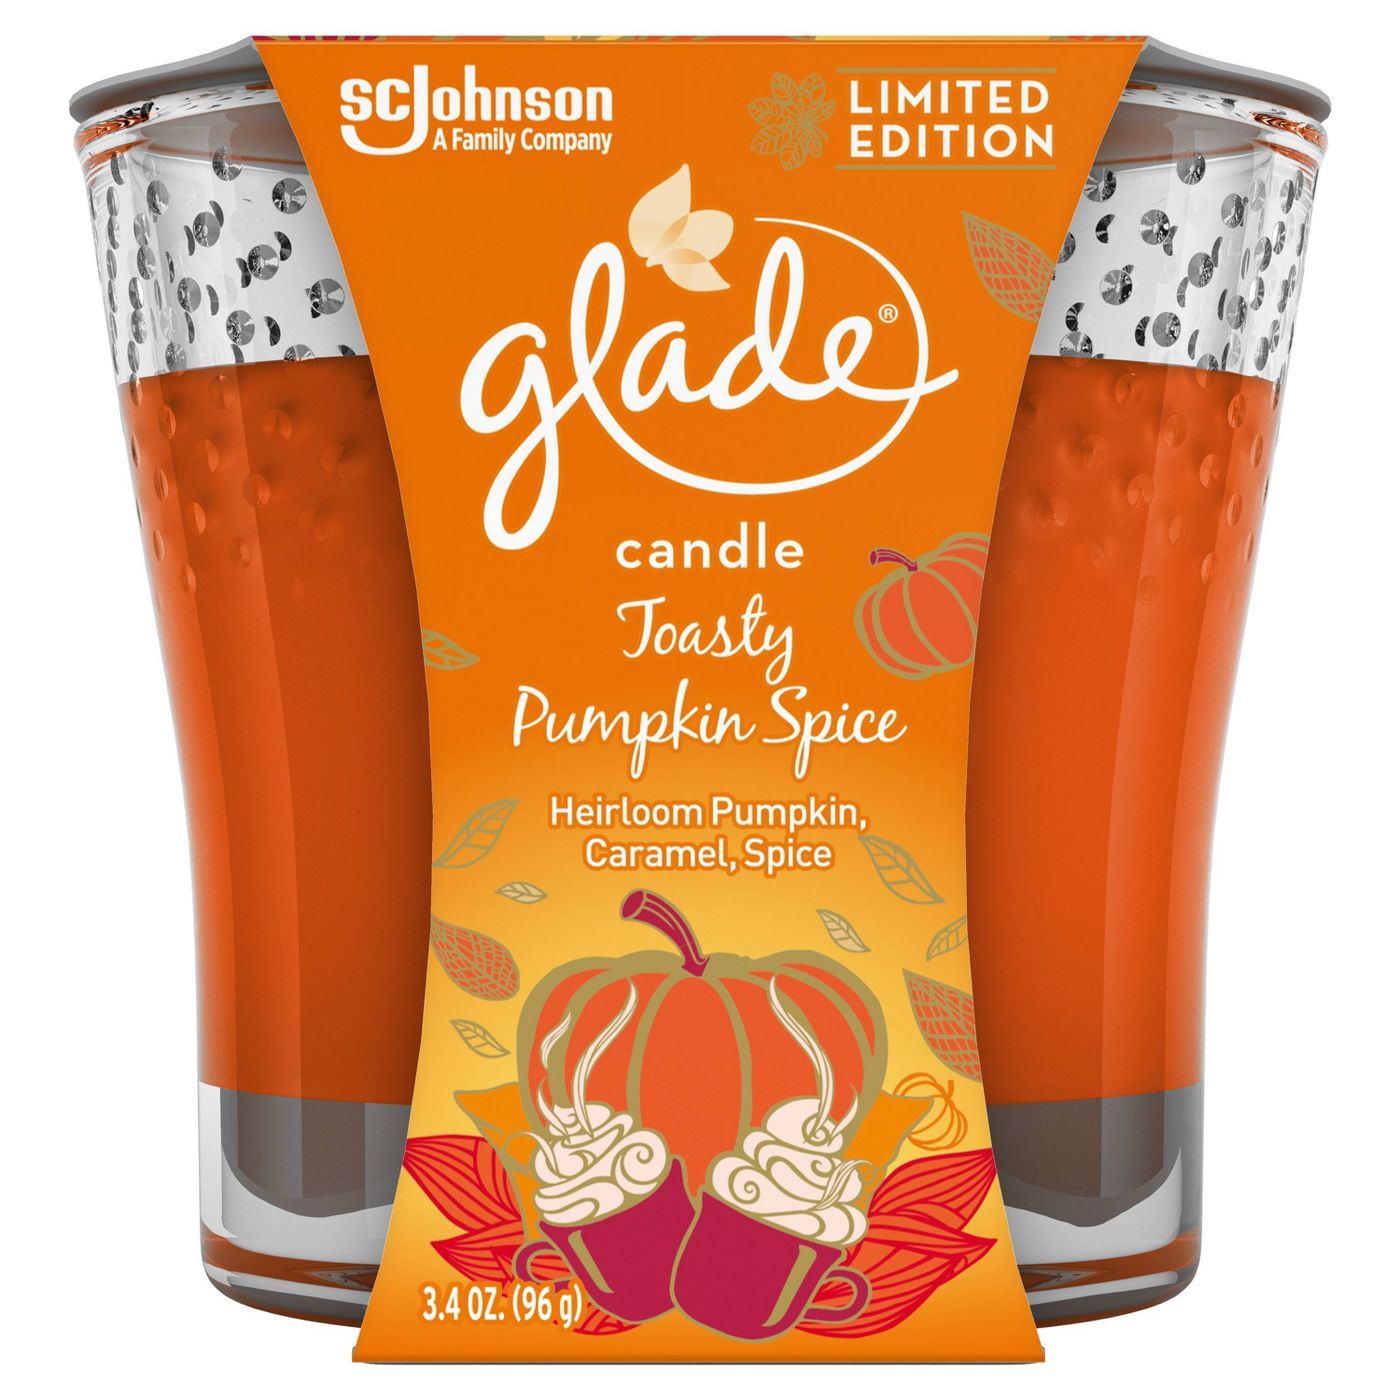 Glade Candle - Toasty Pumpkin Spice - 3.4oz - image 1 of 4